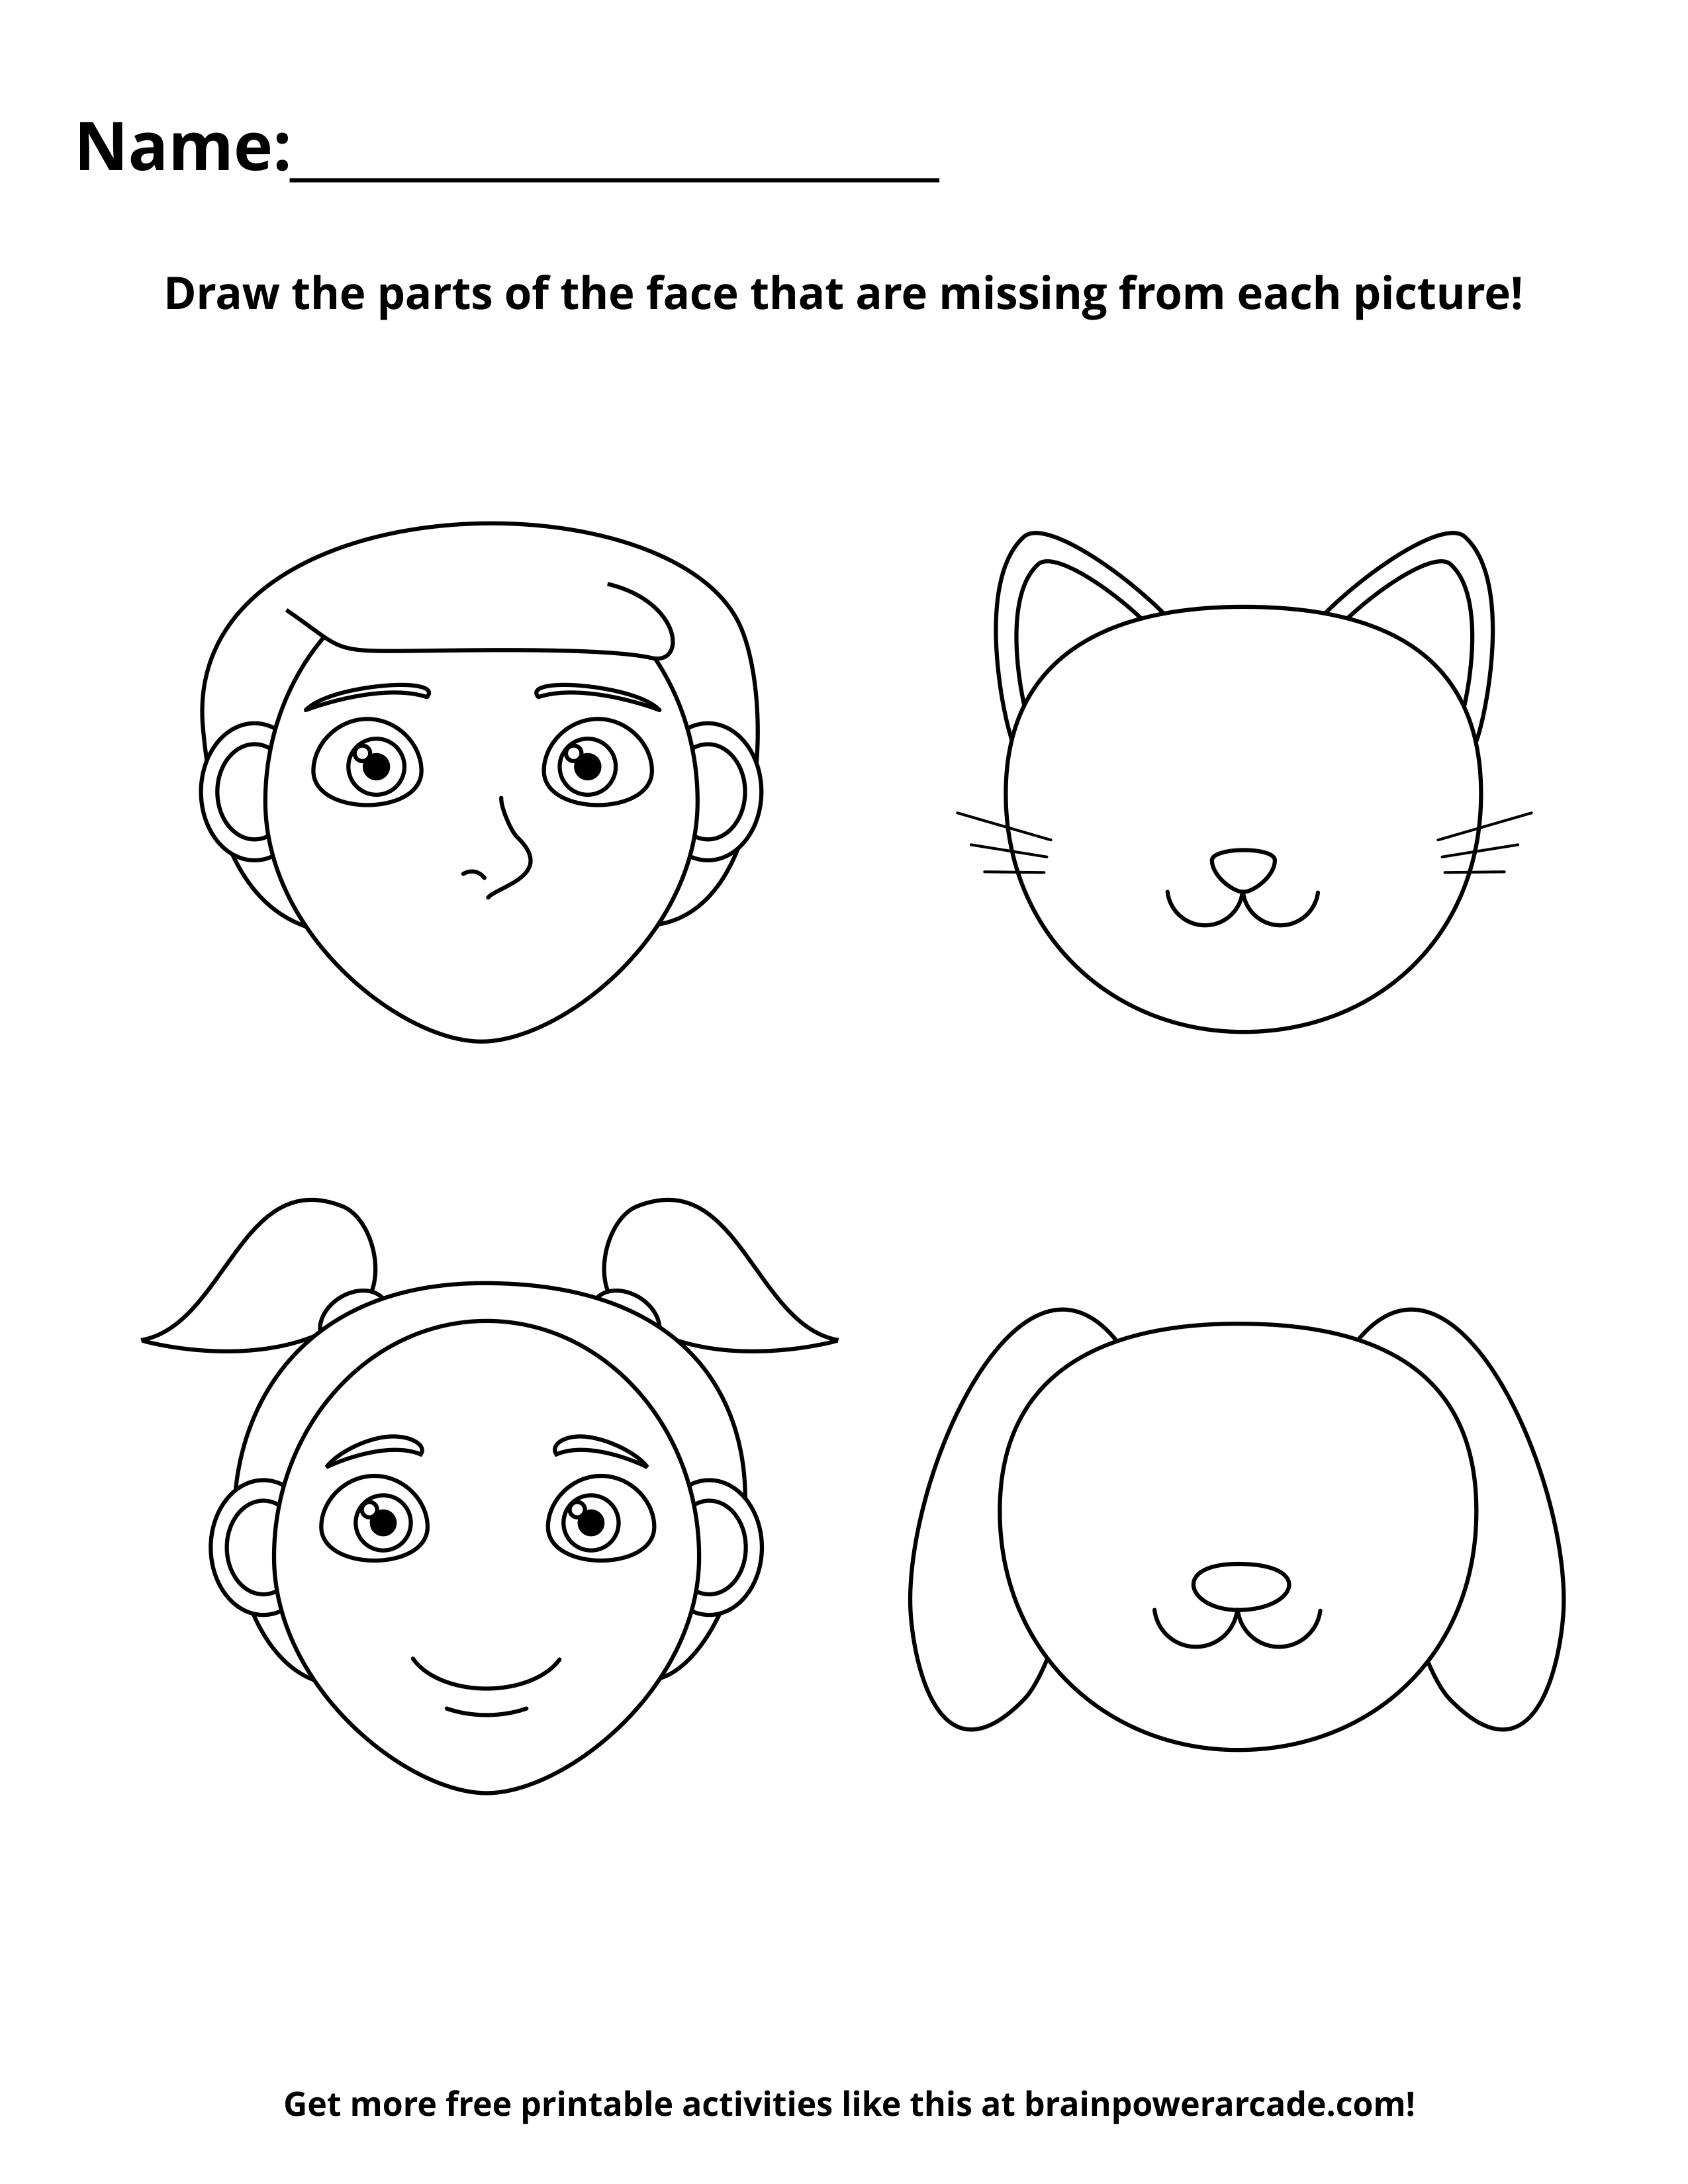 Finish Drawing the Faces